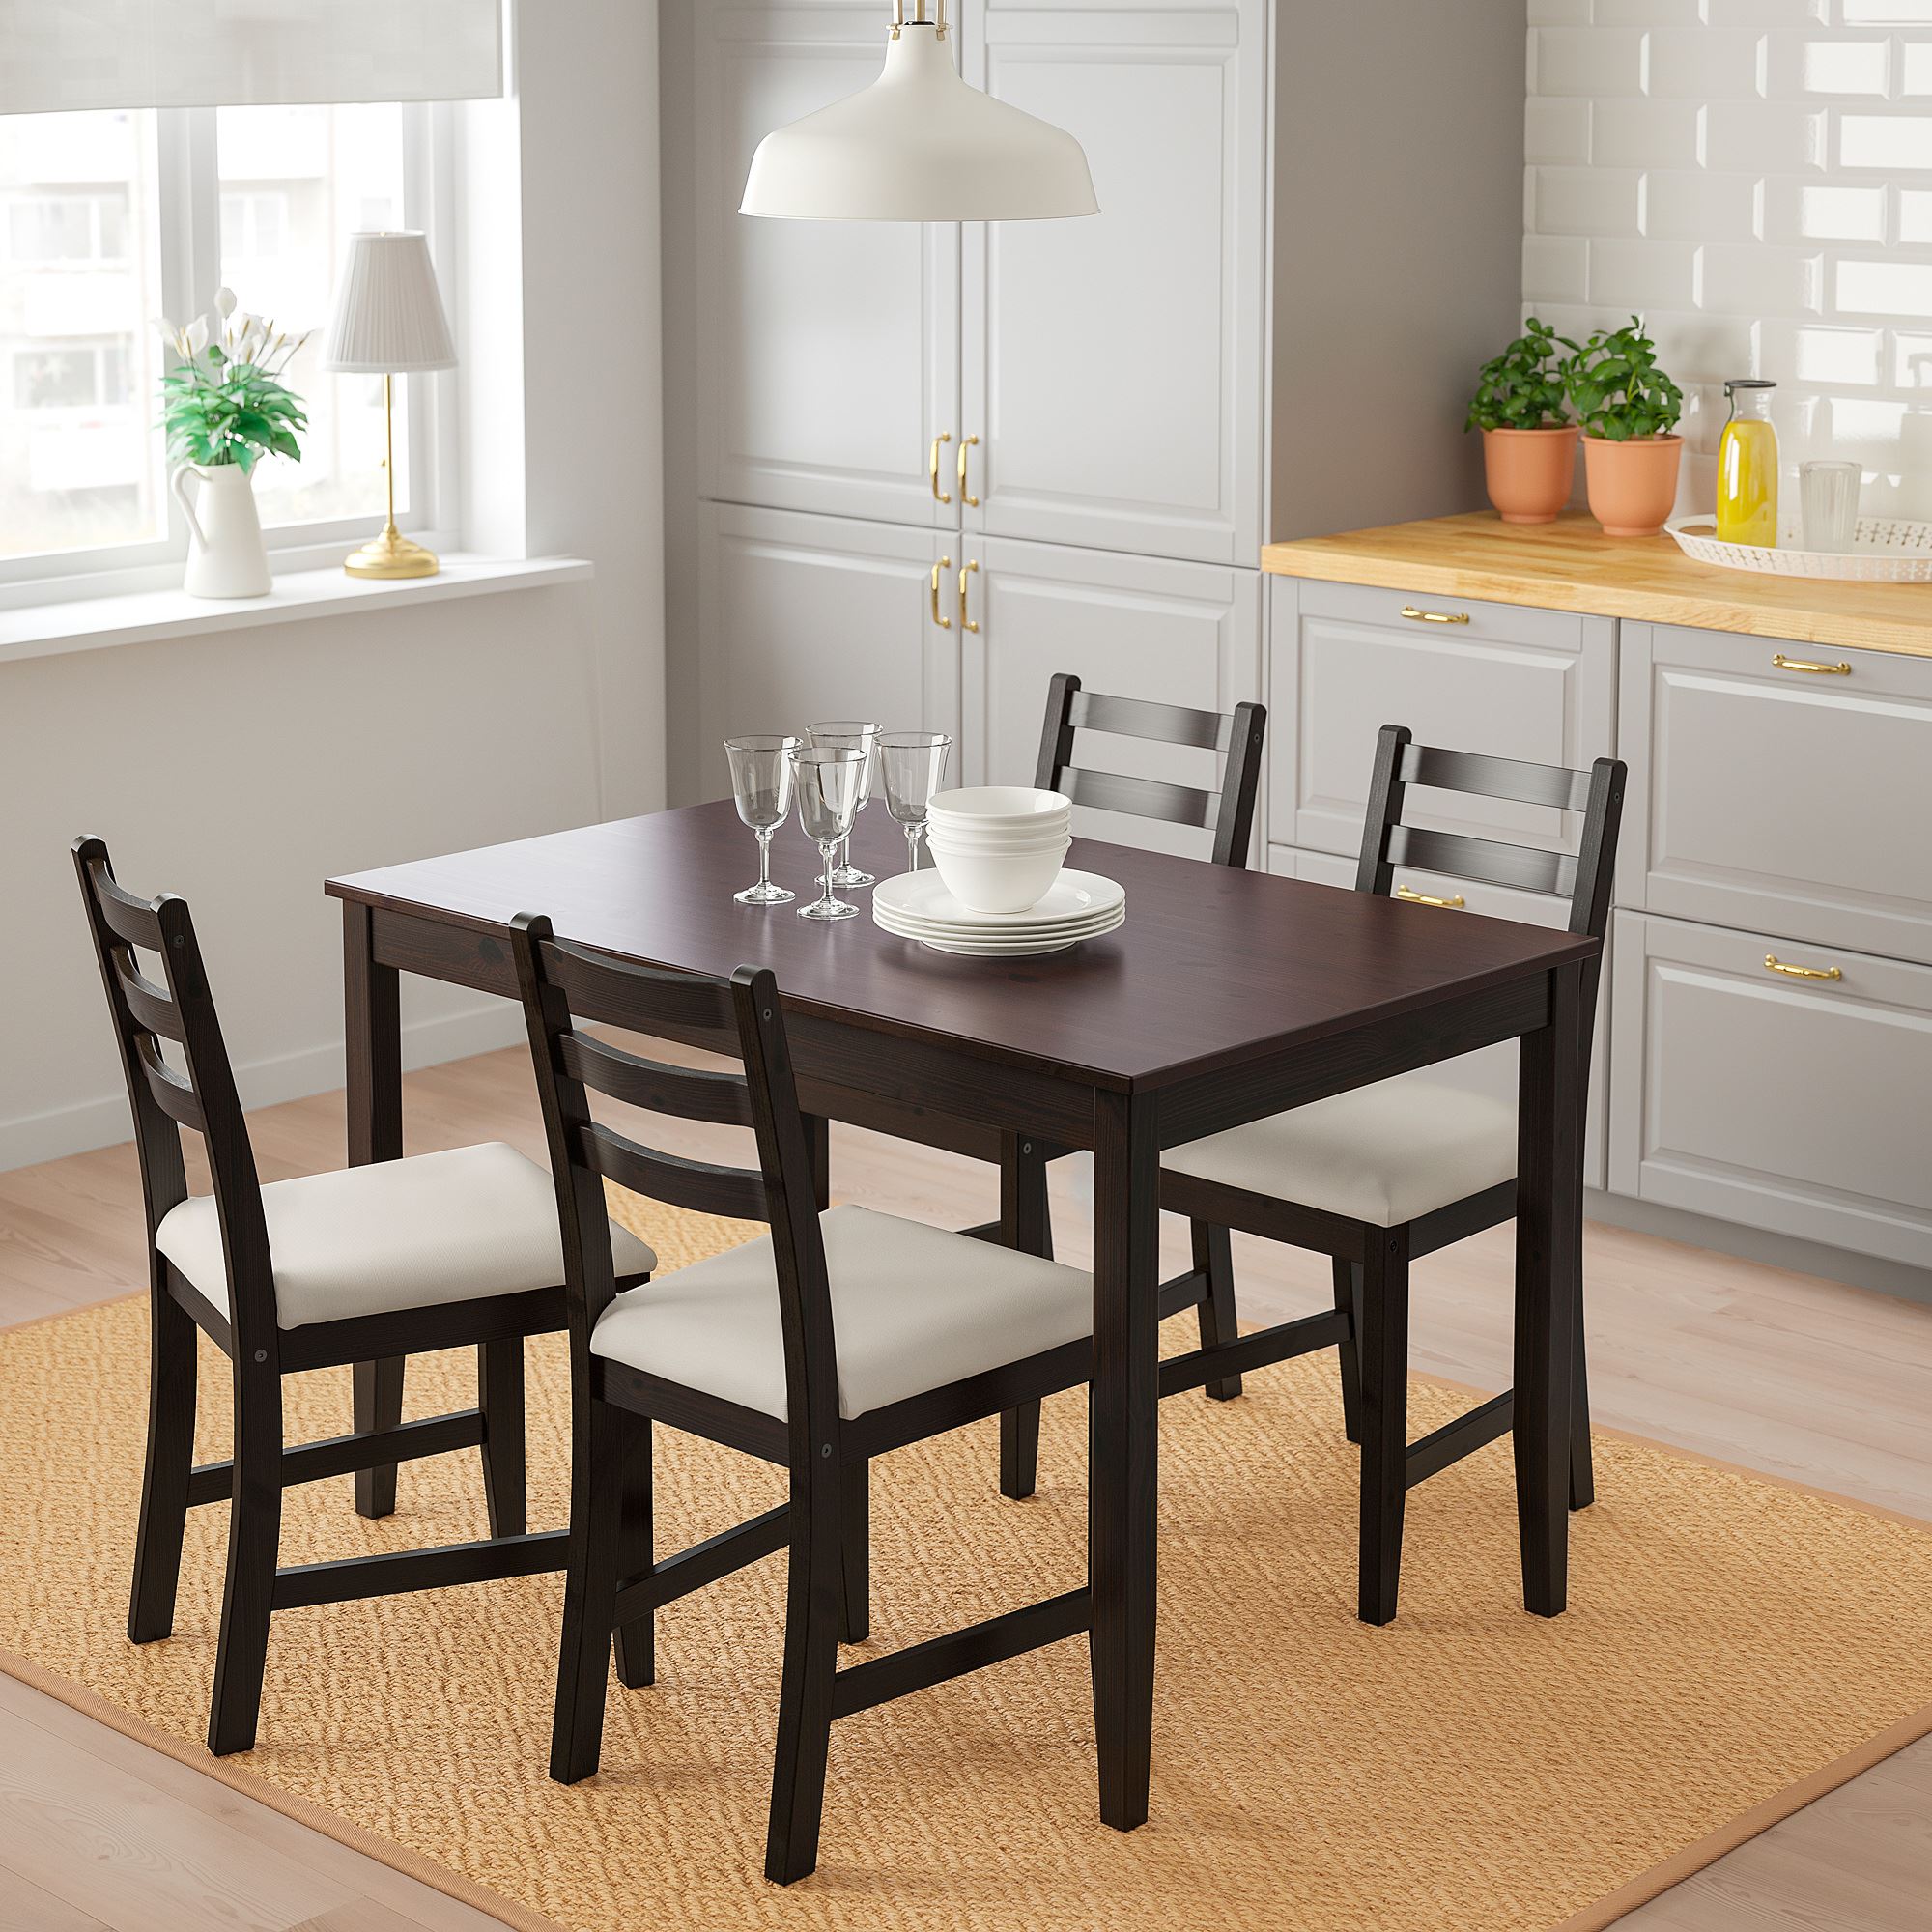 Unique Ikea Dining Table Set for Living room